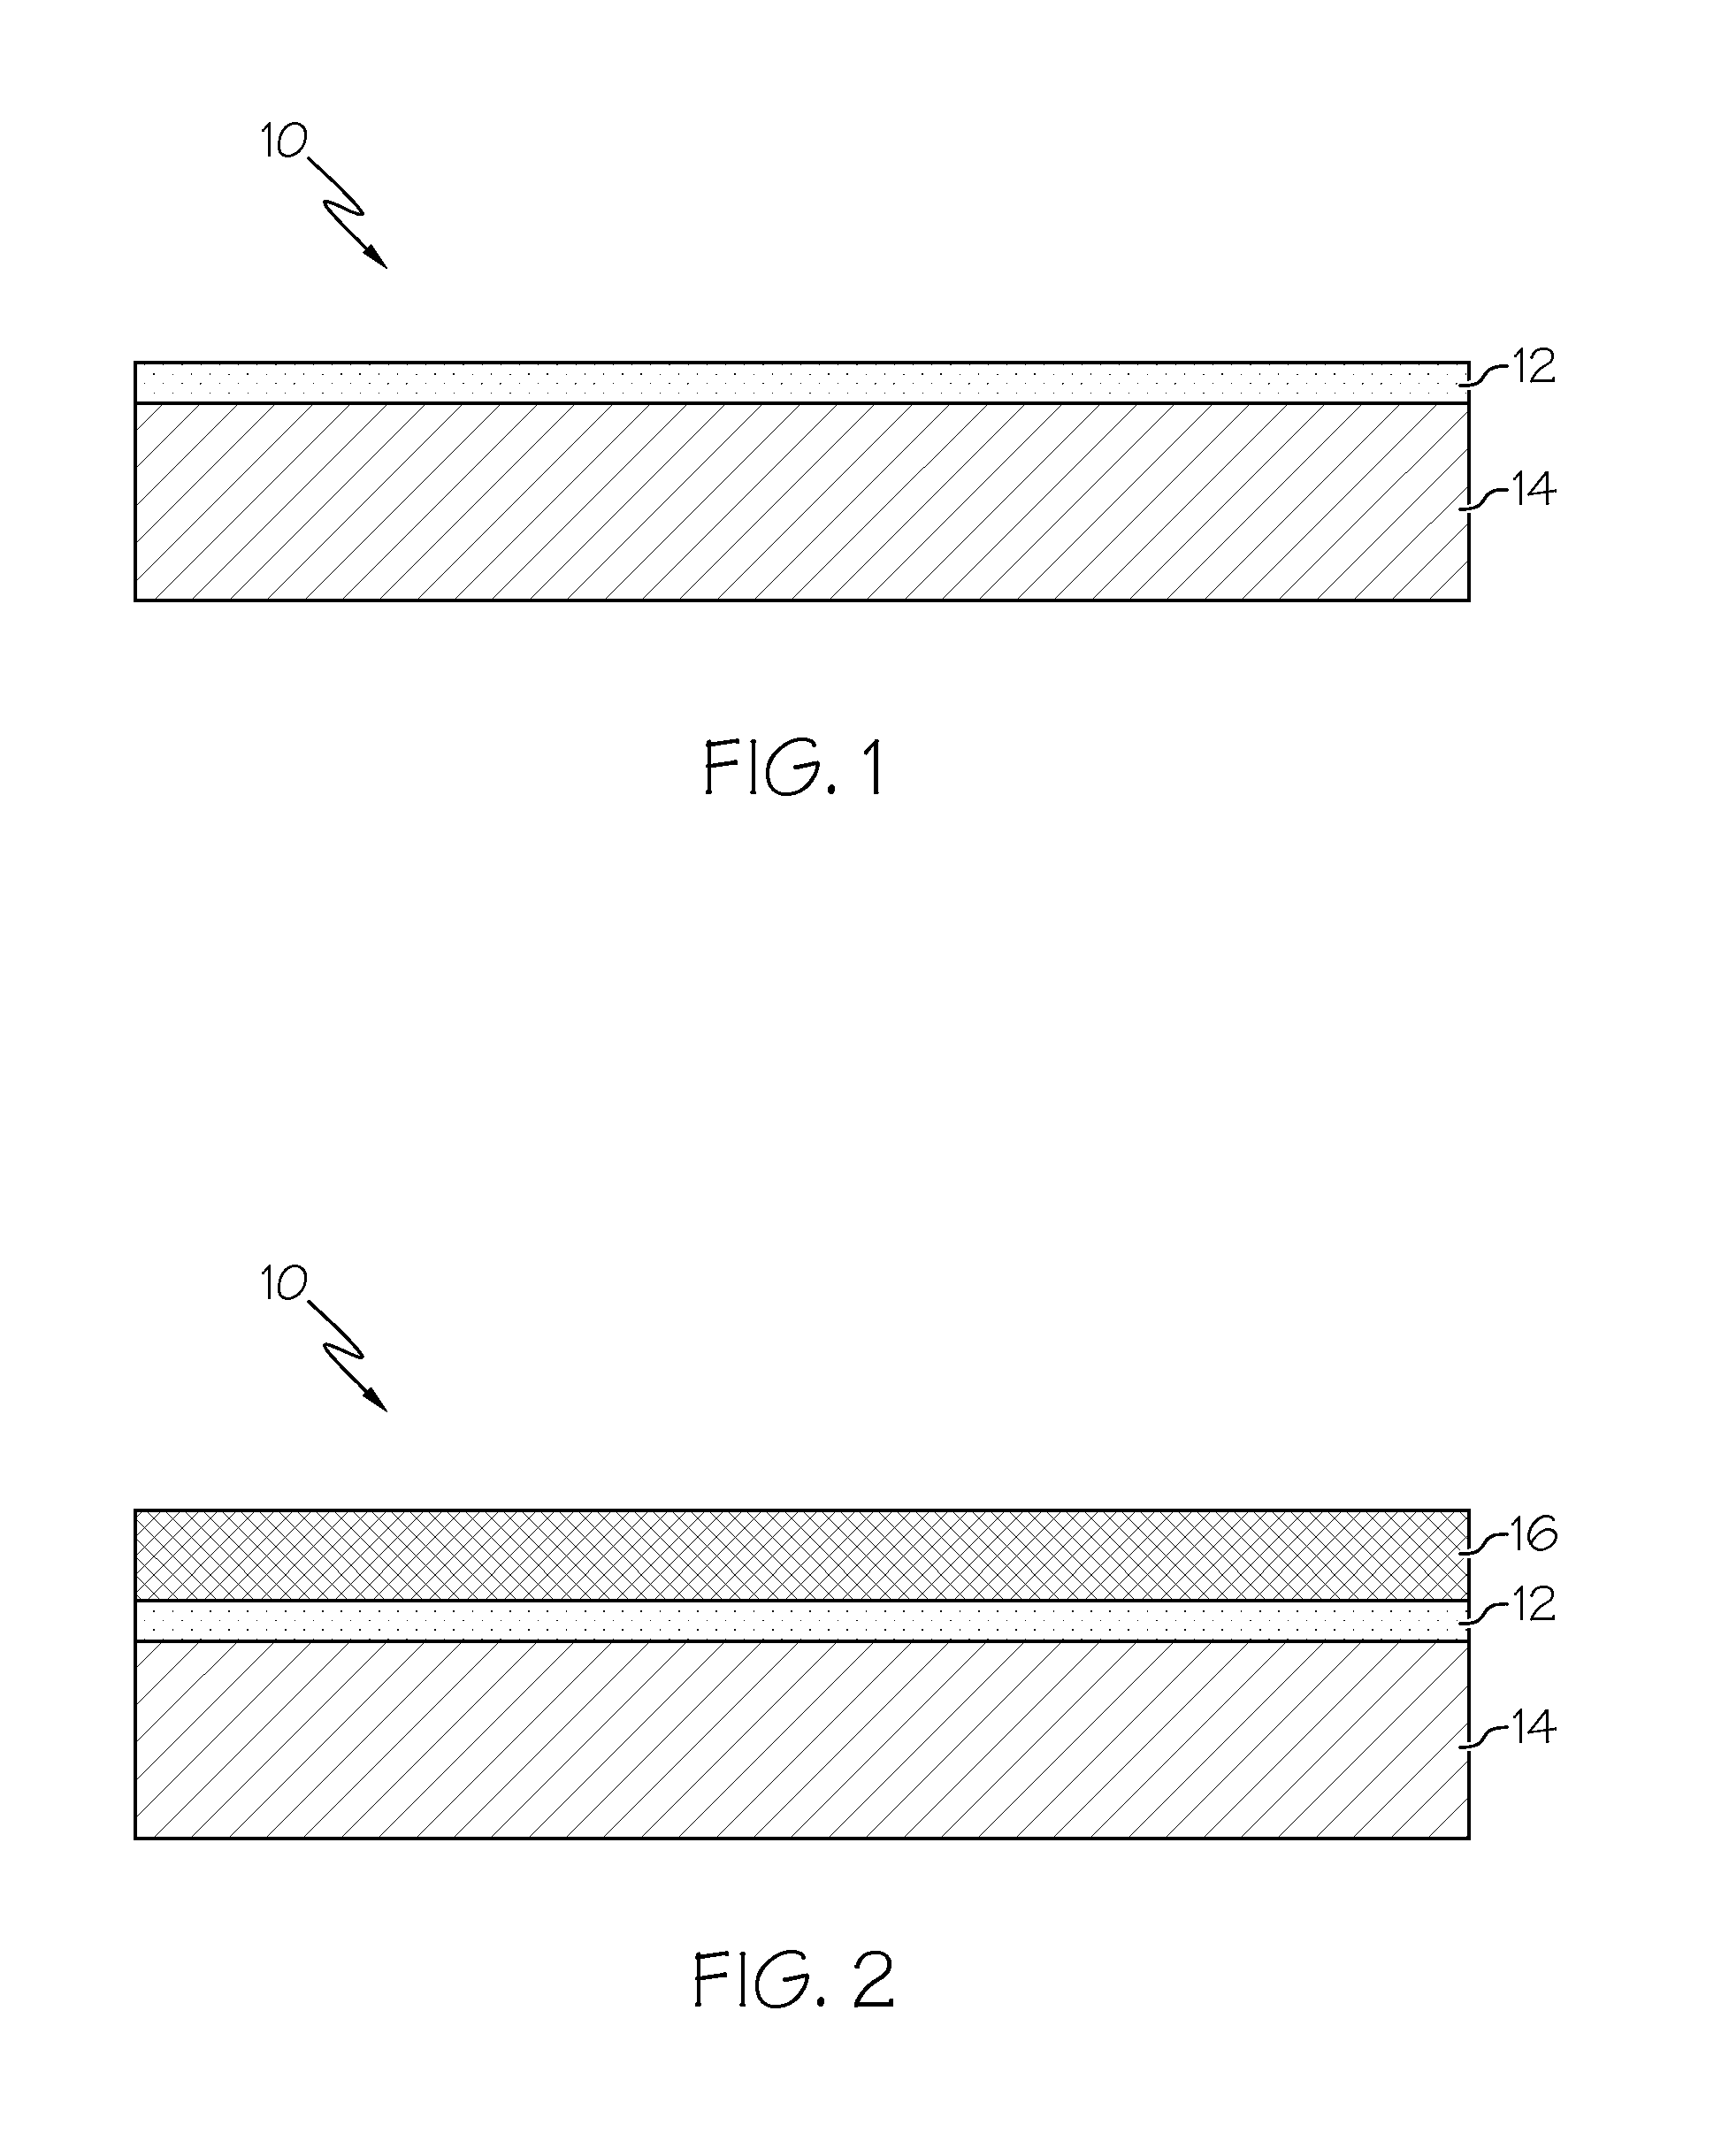 Exhaust treatment system including a nickel-based catalyst